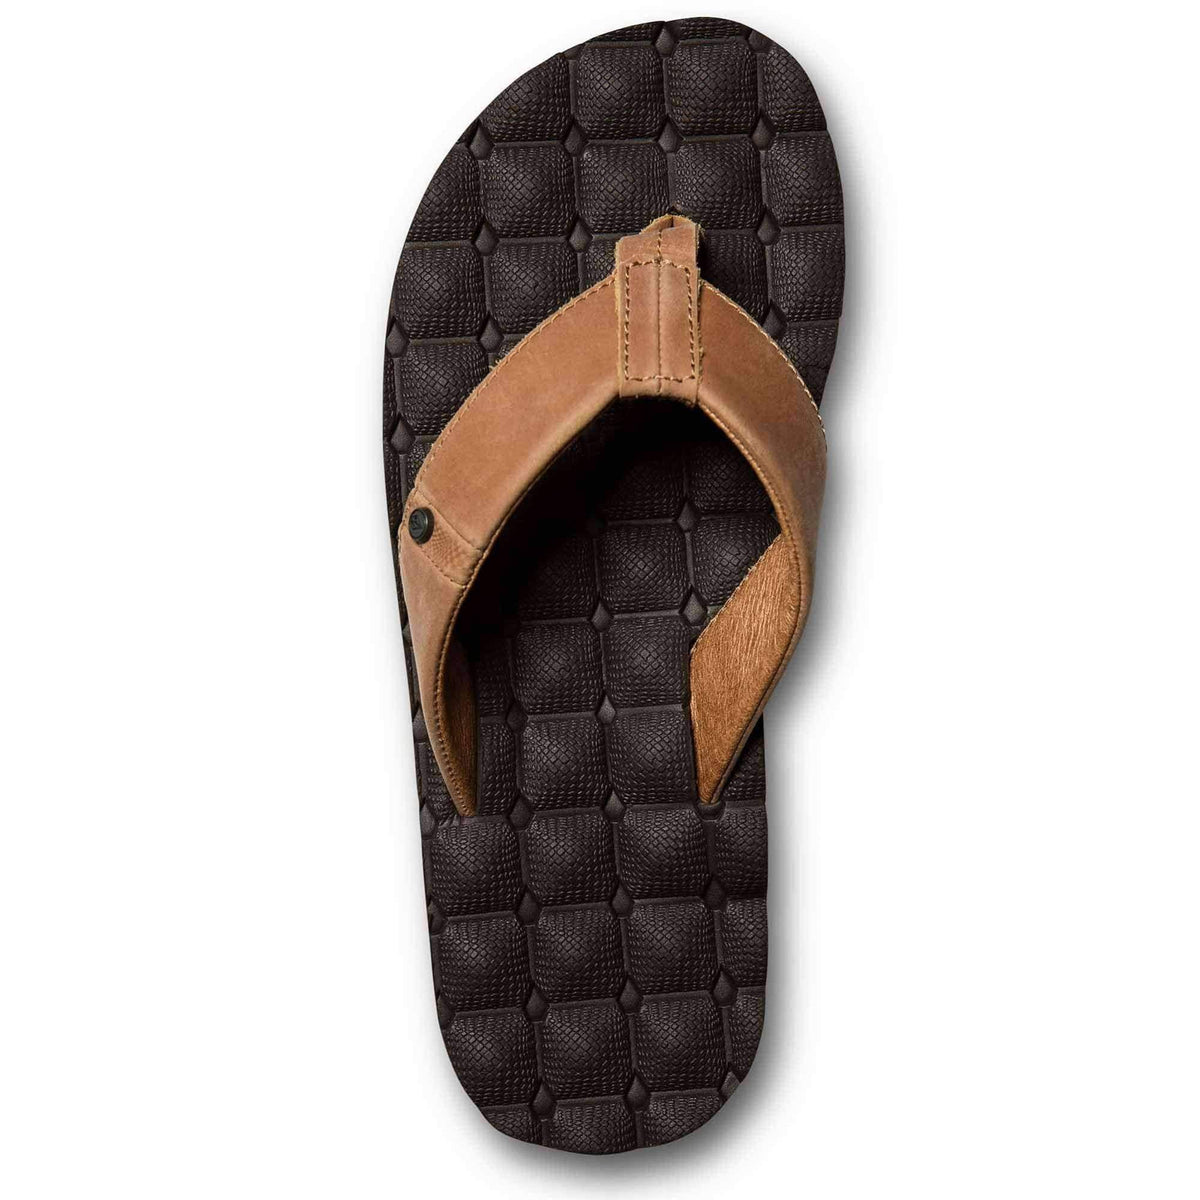 Volcom Recliner Leather Sandals in Brown Combo Mens Flip Flops by Volcom